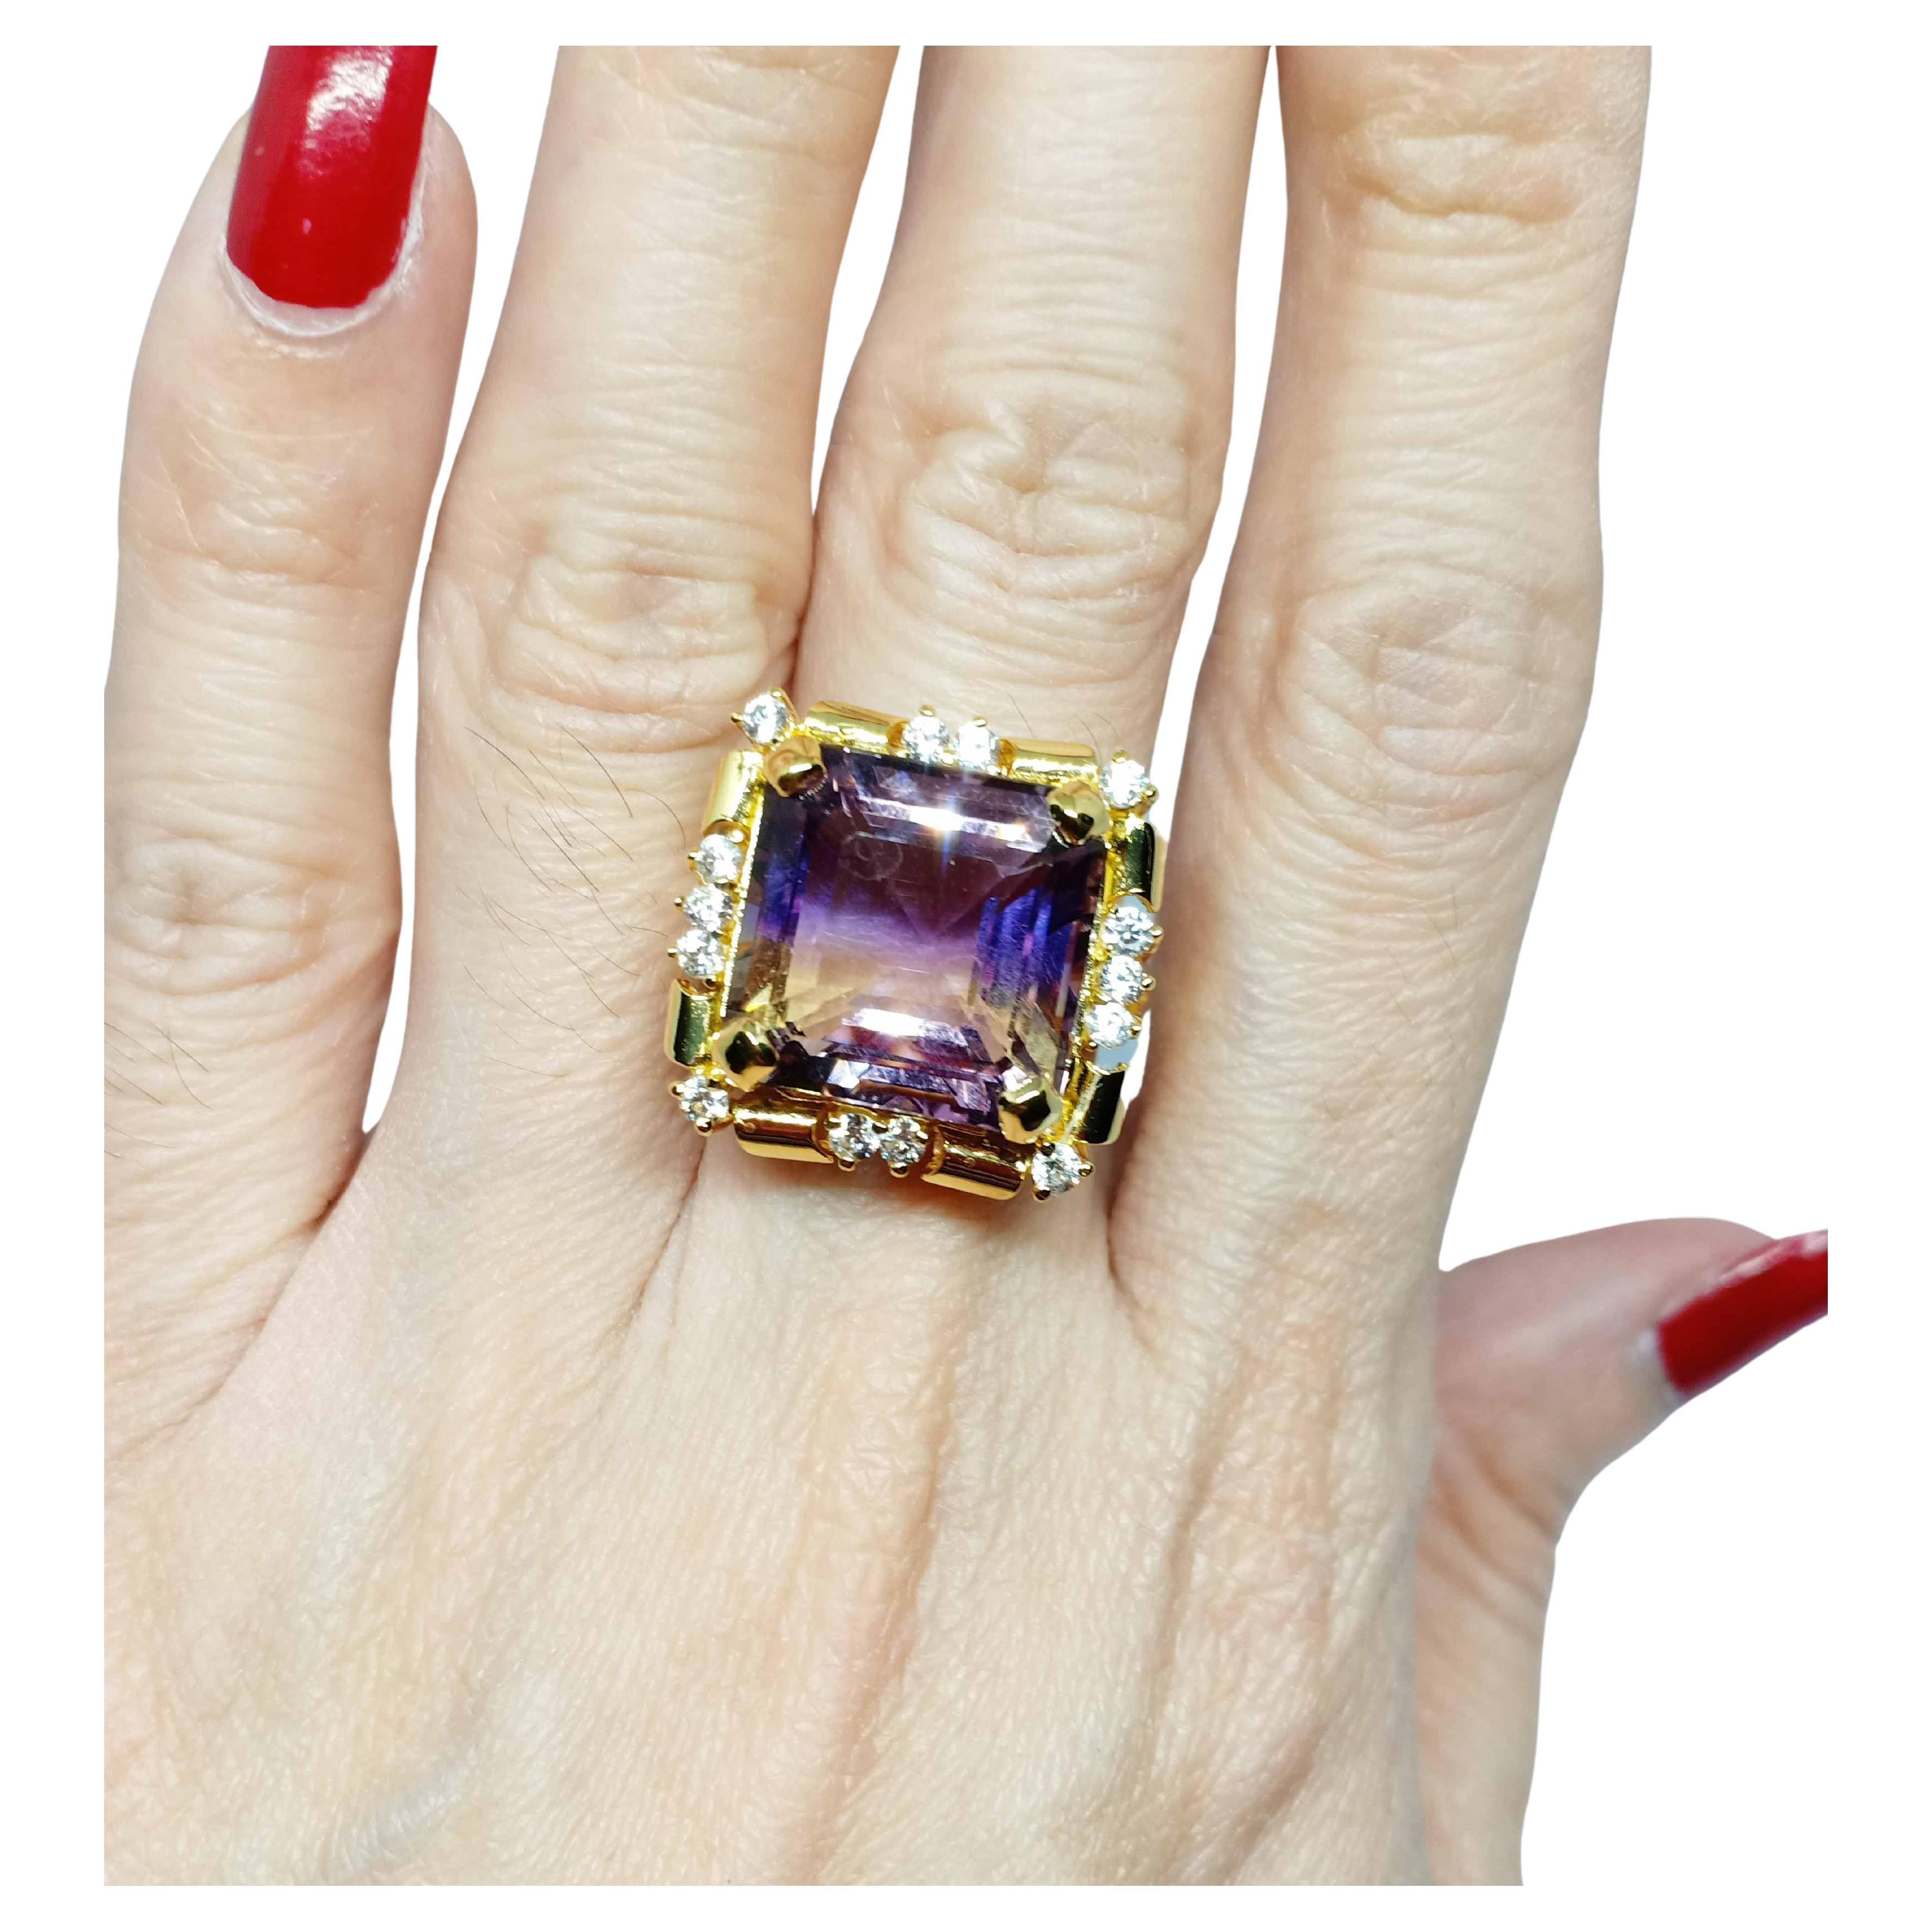 (15.89cts)Ametrine Ring sterling silver on 18K Gold Plated. For Sale